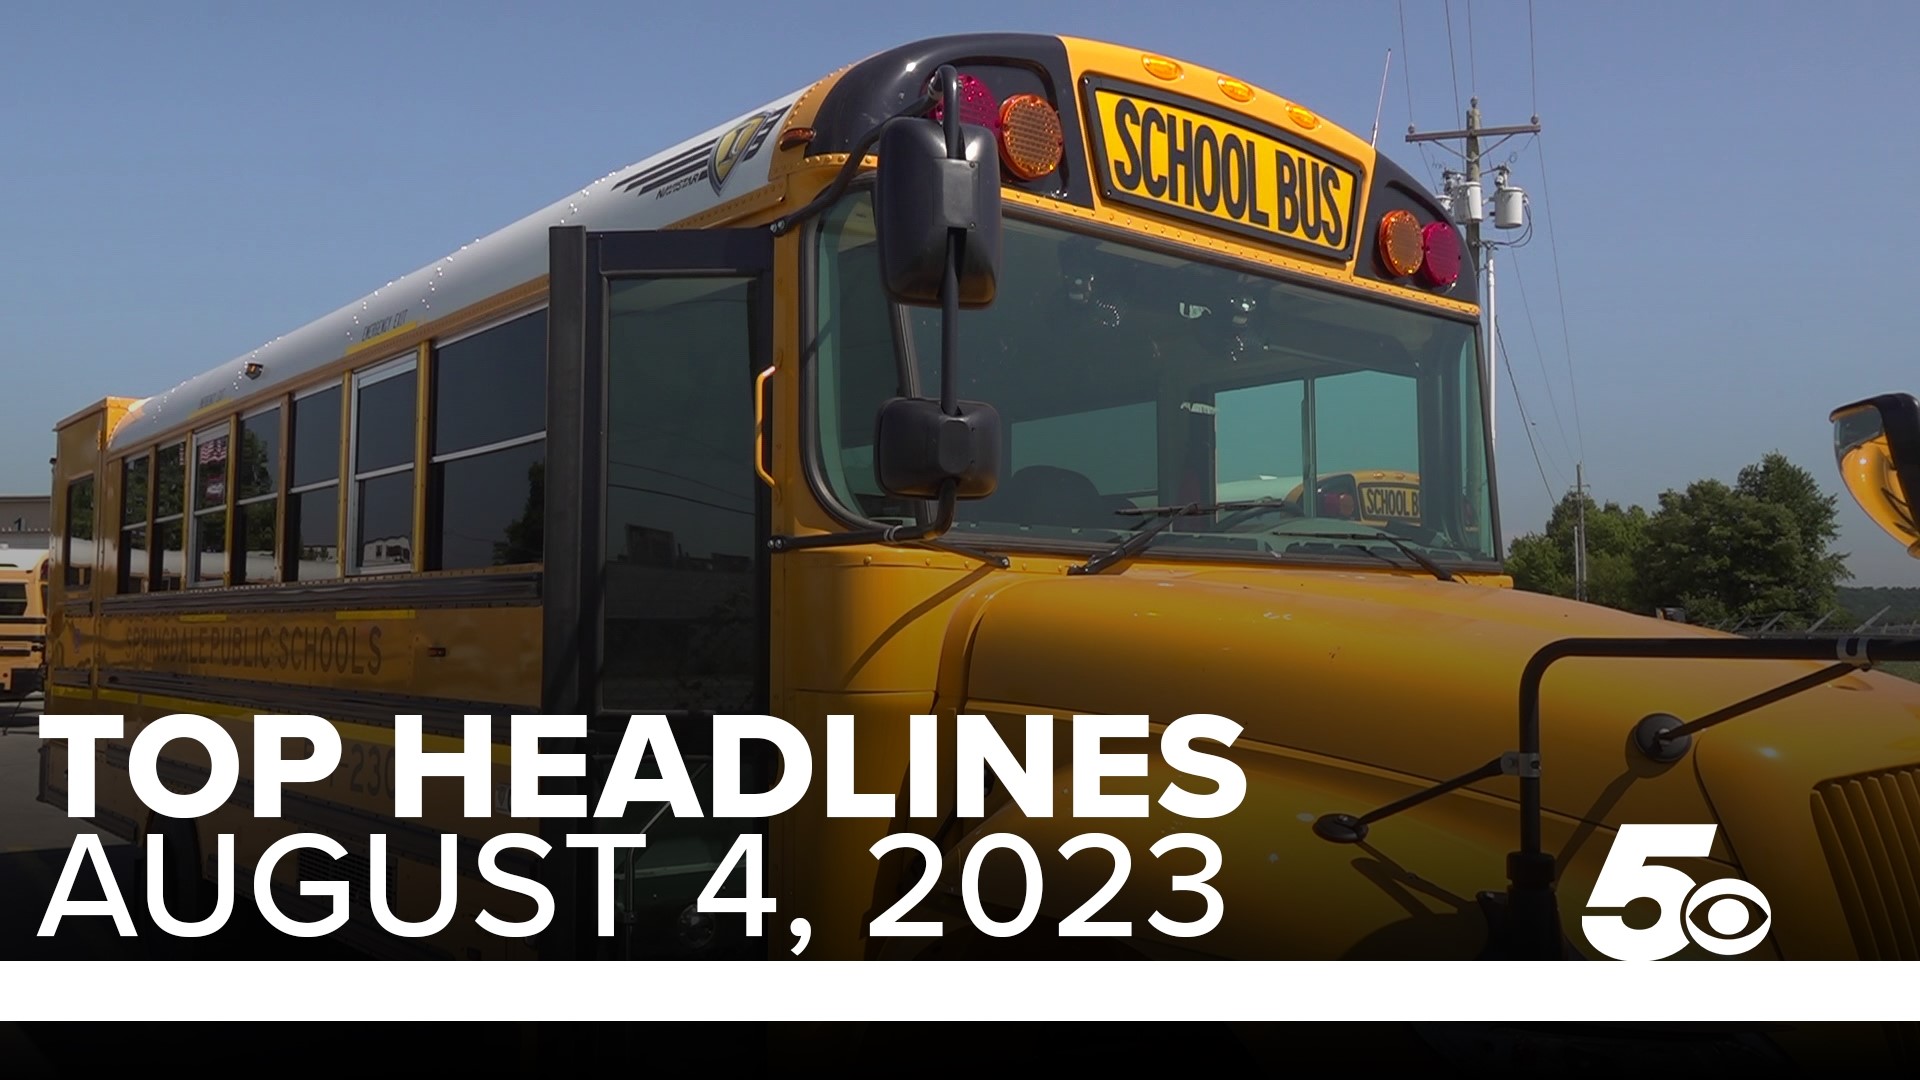 Top headlines for Northwest Arkansas, the River Valley and beyond on August 4, 2023.